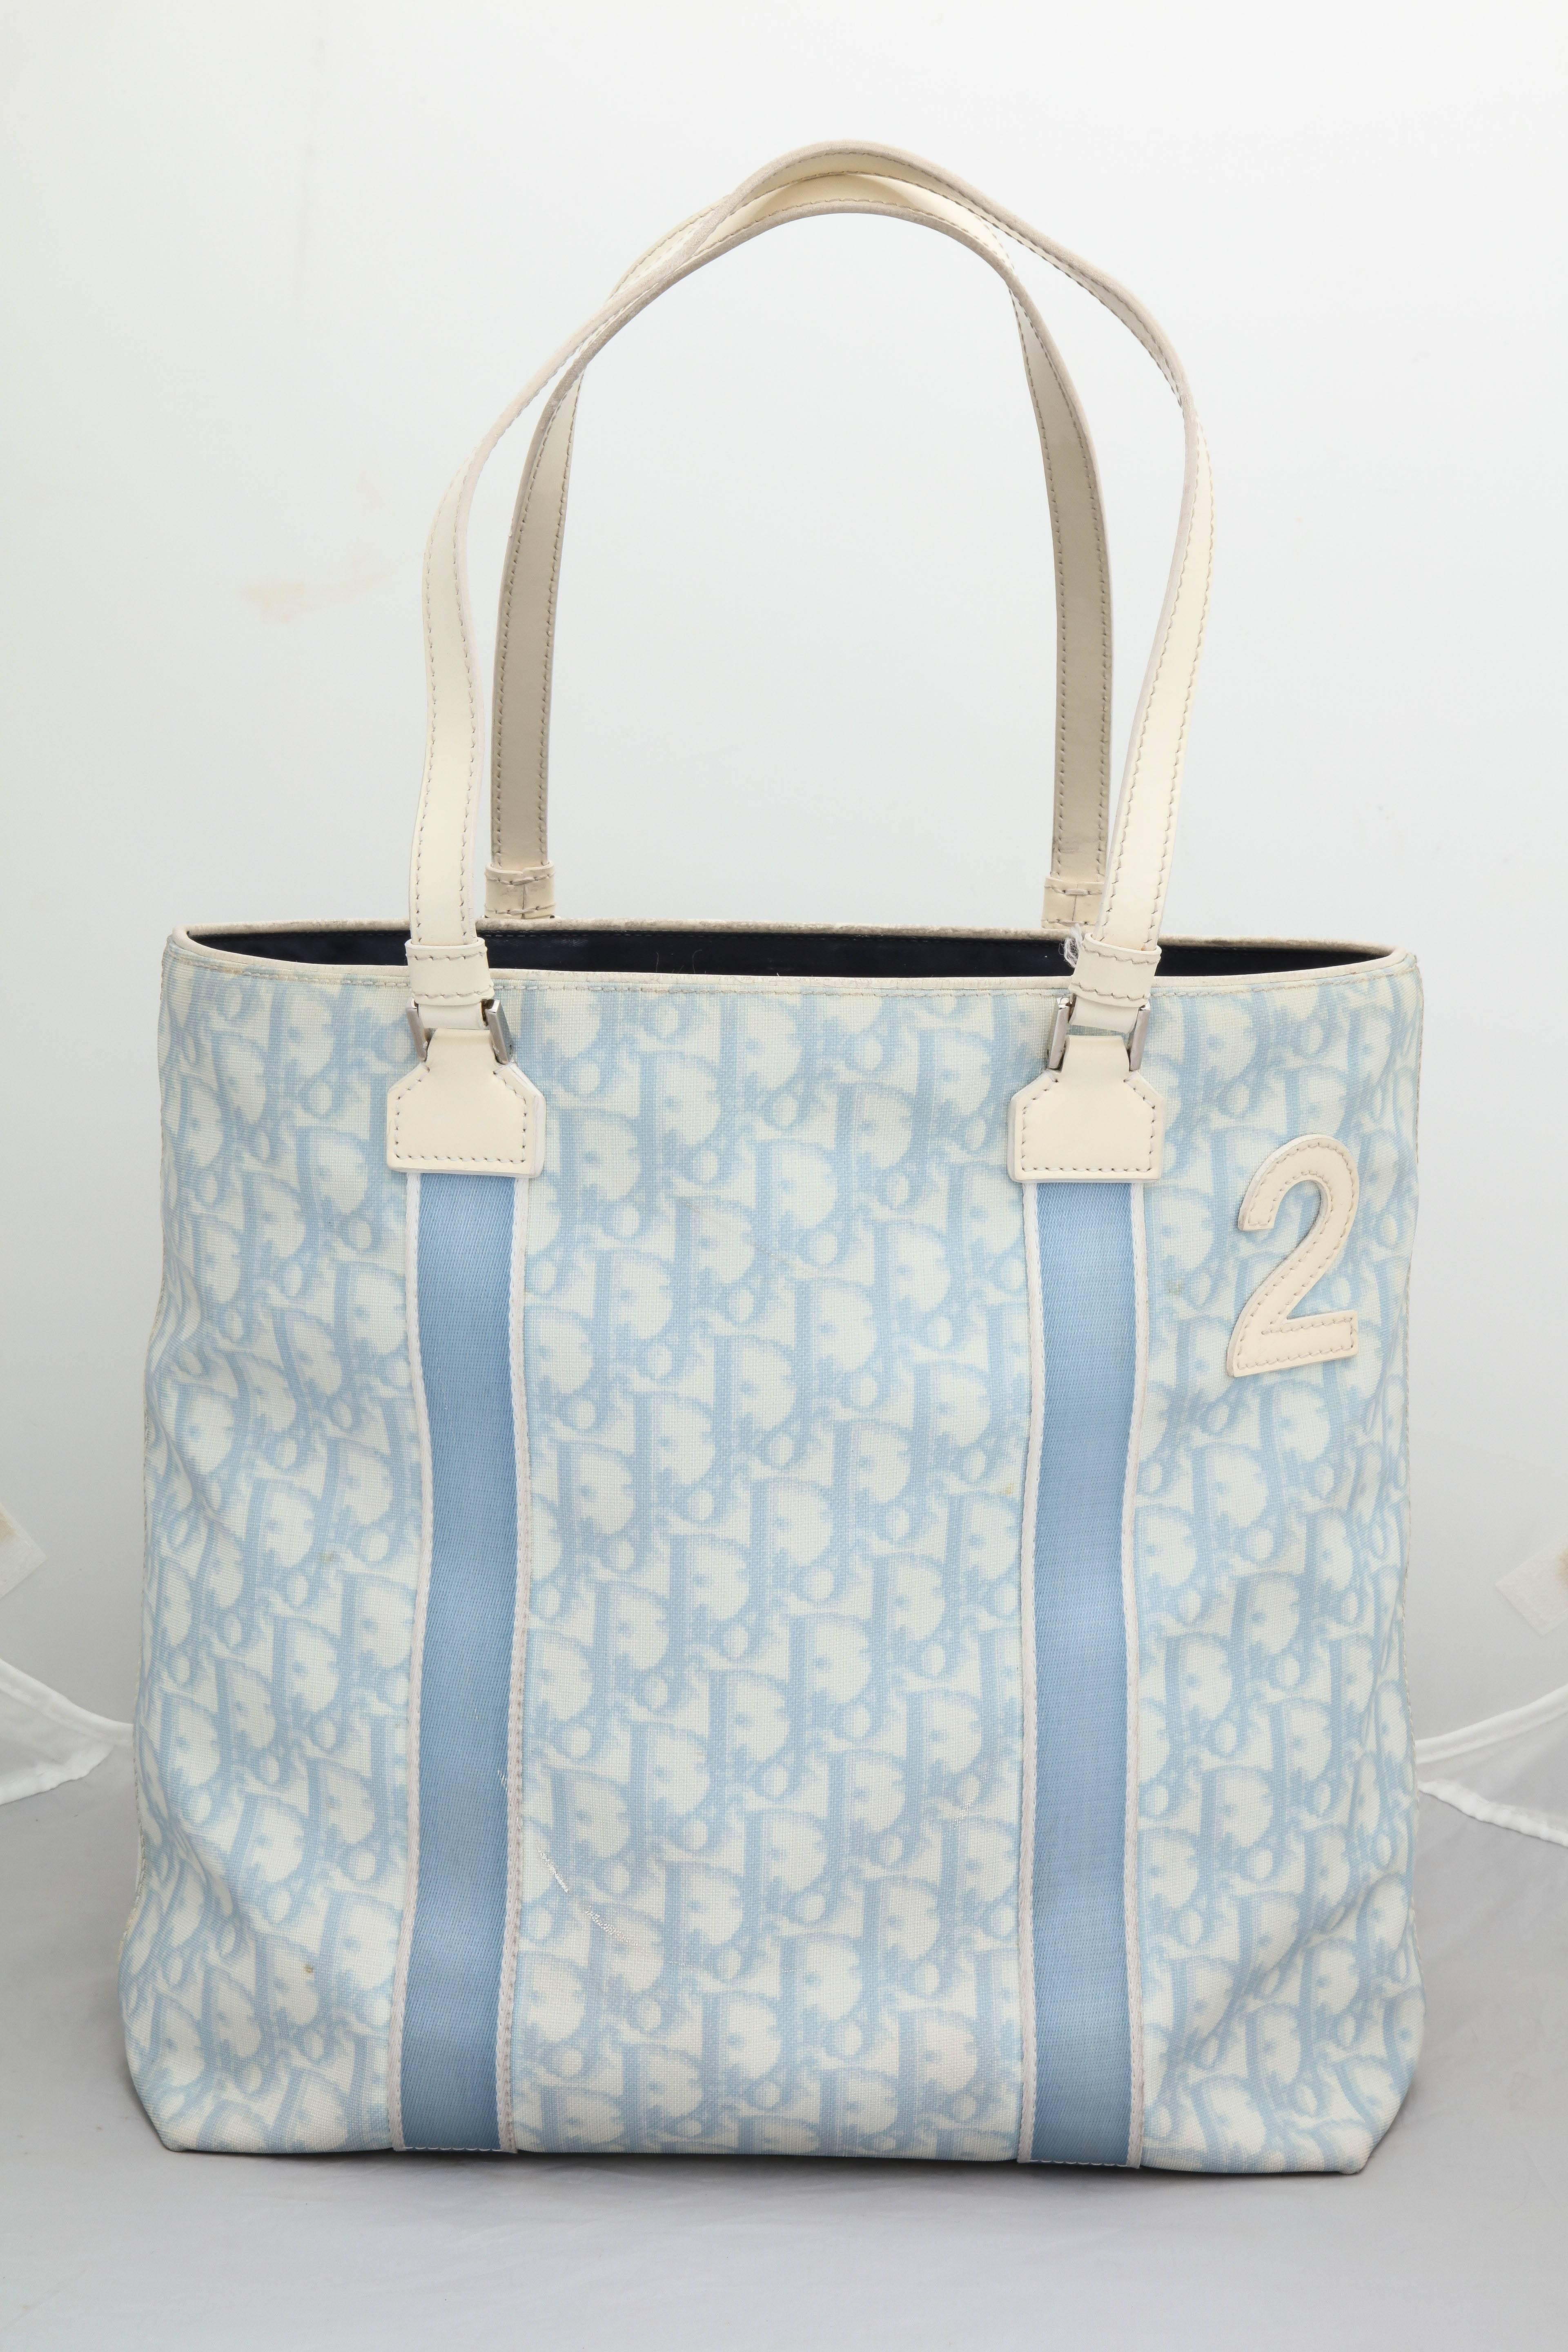 Christian Dior light blue logo tote bag designed by John Galliano with 